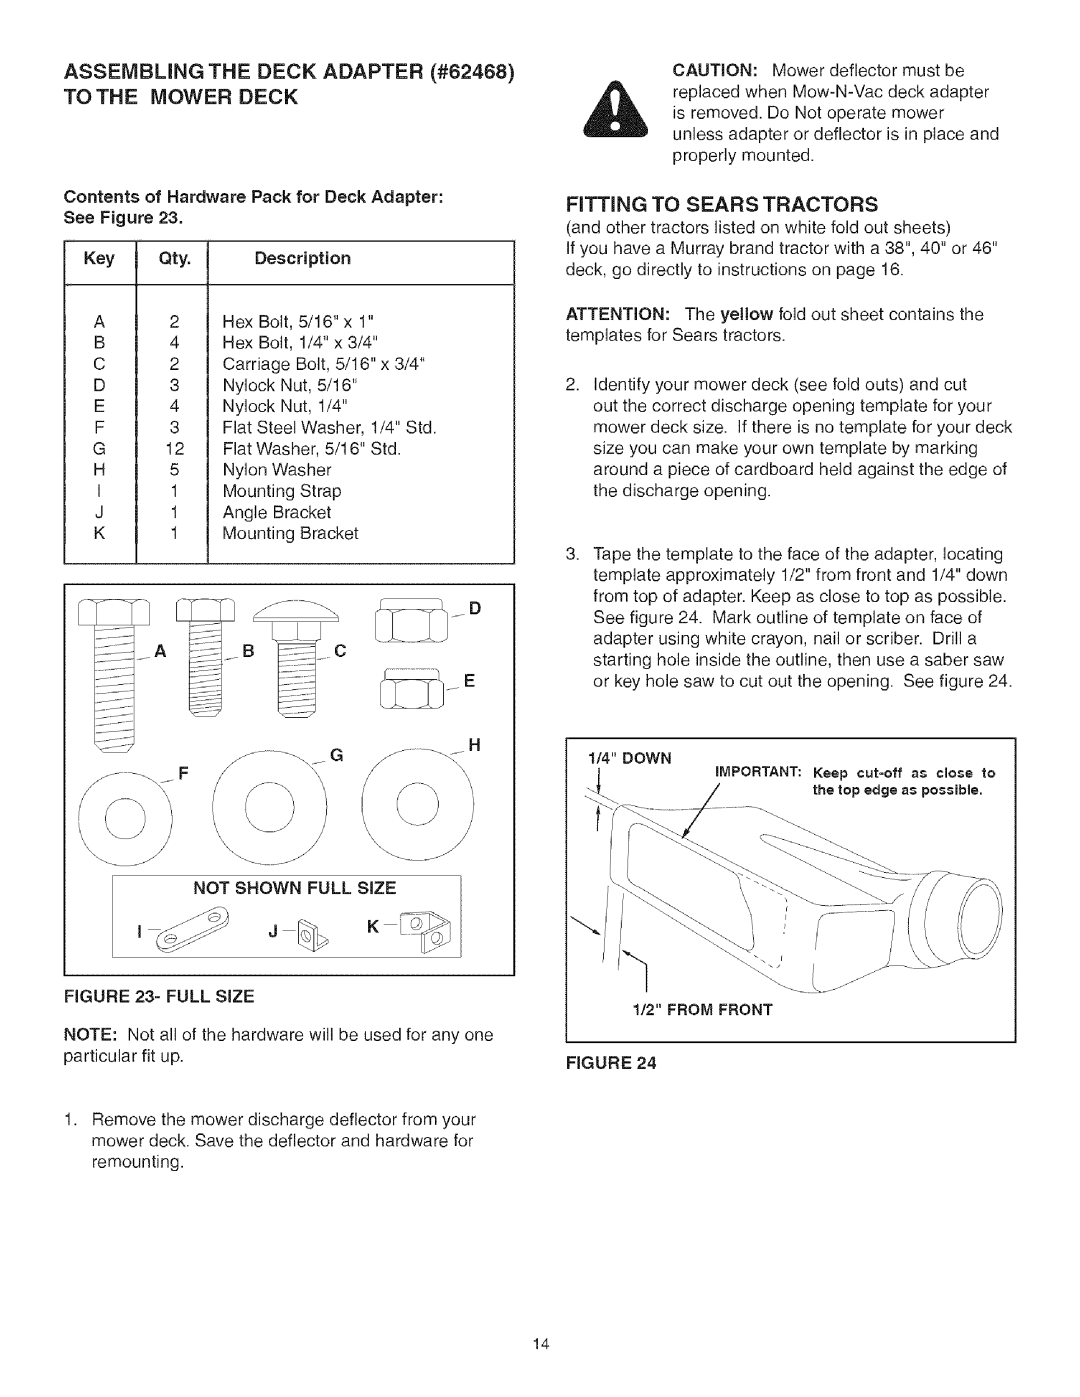 Craftsman 486.24517 manual ASSEMBLING THE DECK ADAPTER #62468, Tothe Mower Deck, FiTTiNG TO SEARS TRACTORS 